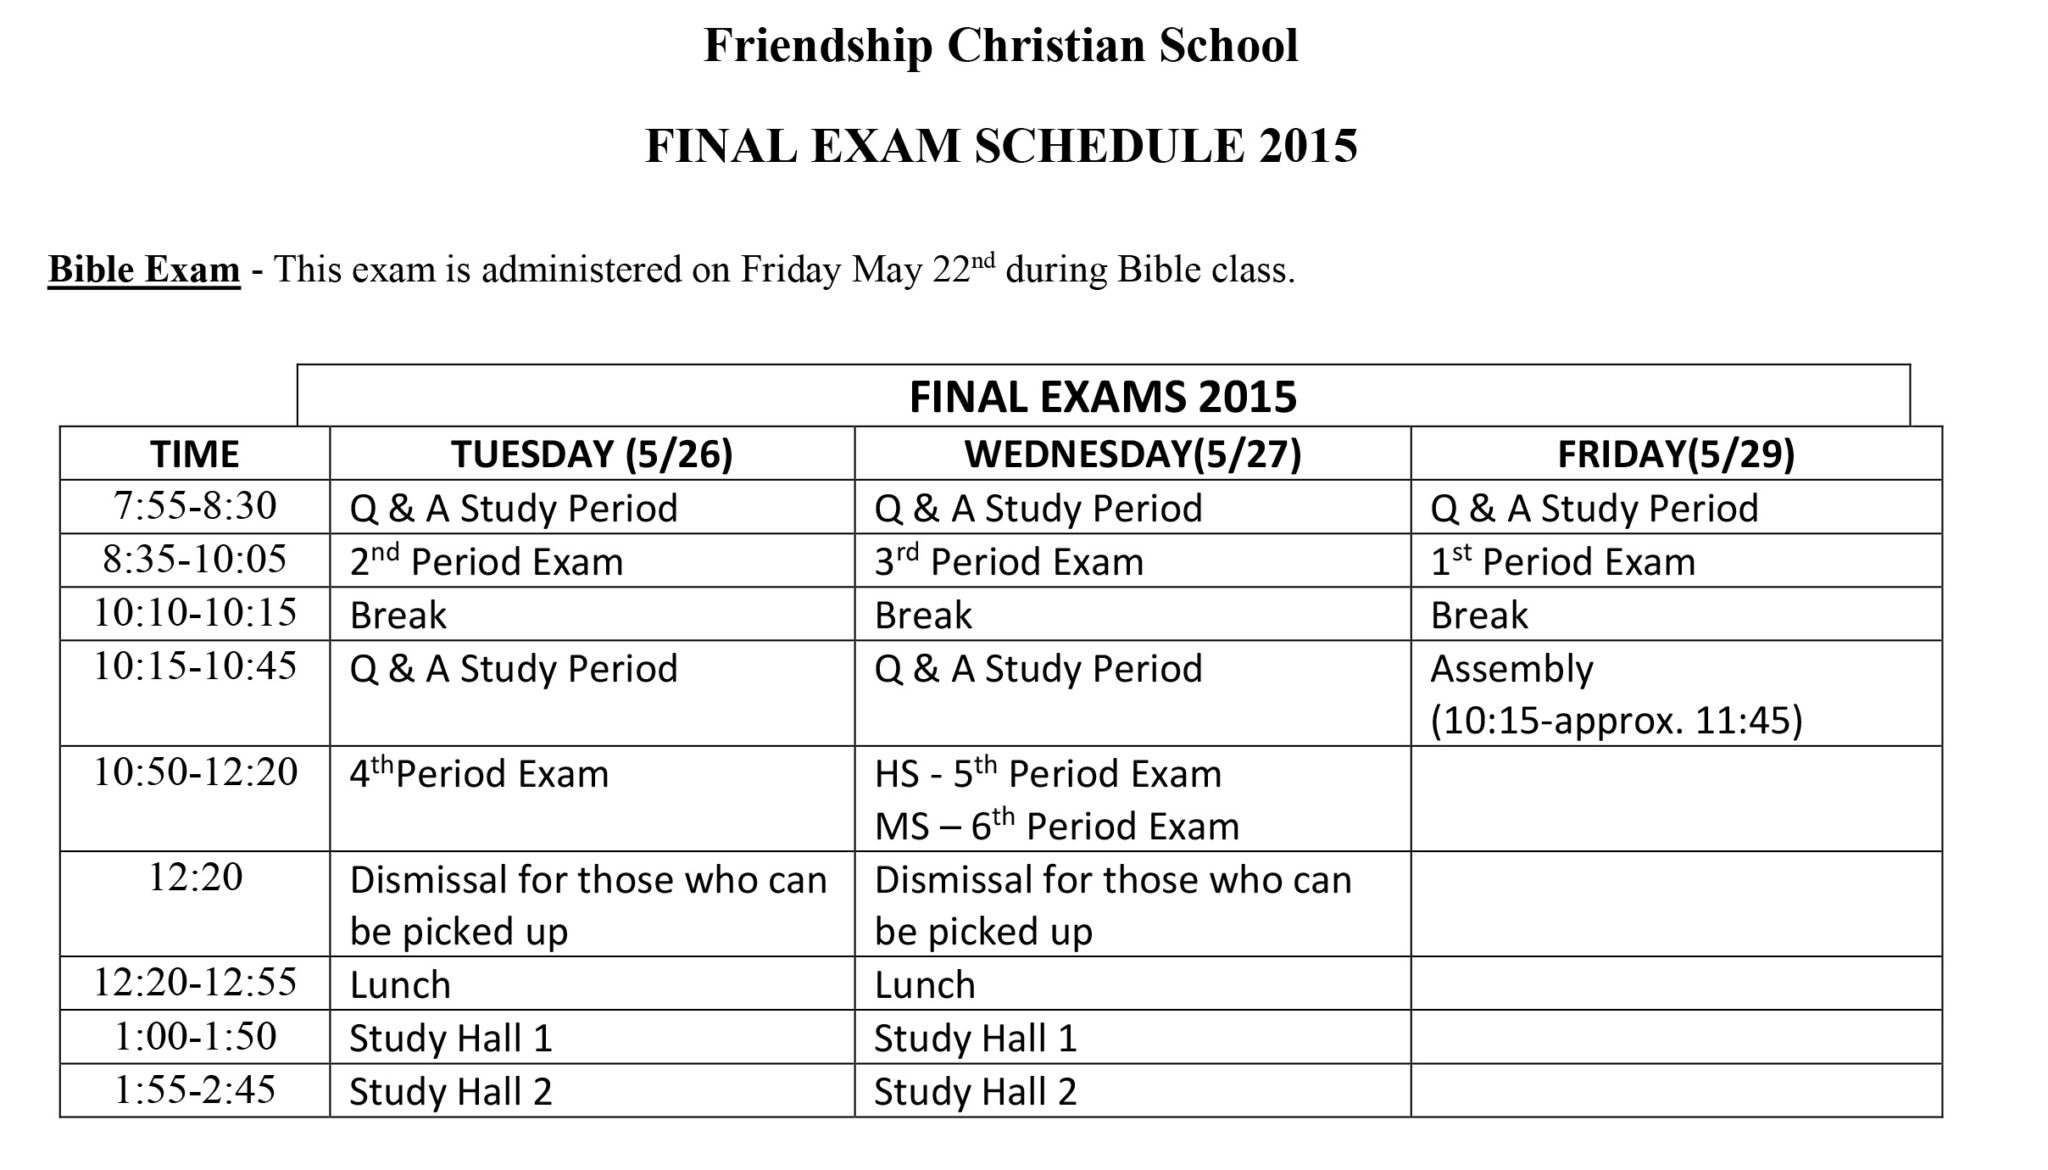 Final Exam Schedule 2015 - Student Edition - Schedule Only